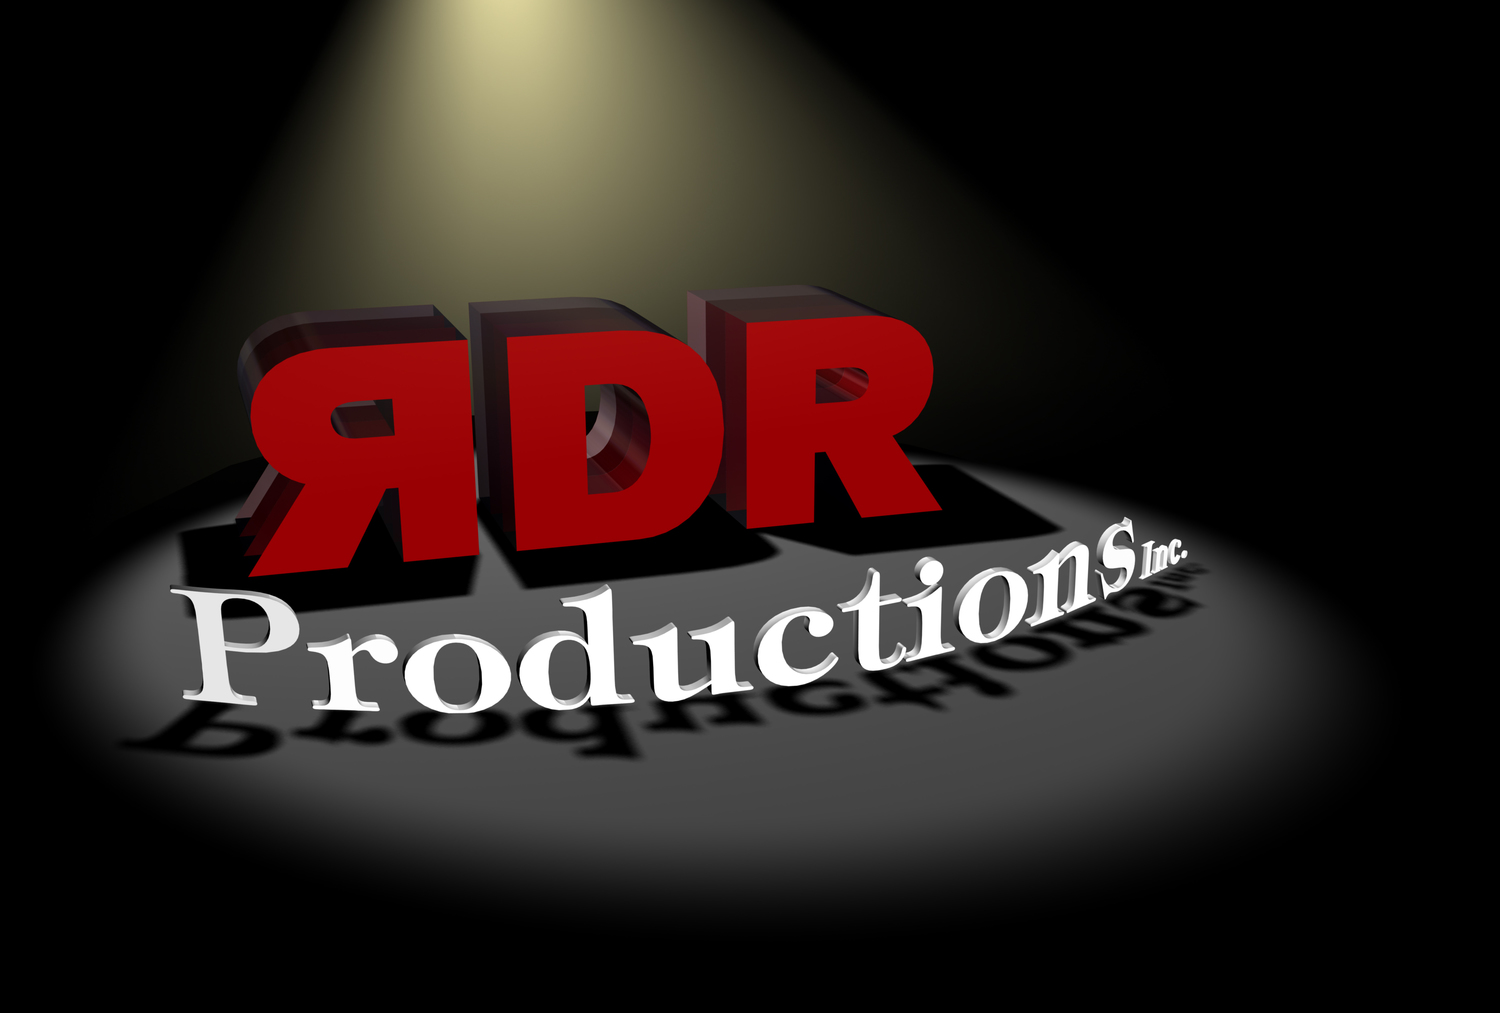 Video Production Chicago - RDR Productions, Inc. - Corporate Video and Film Production